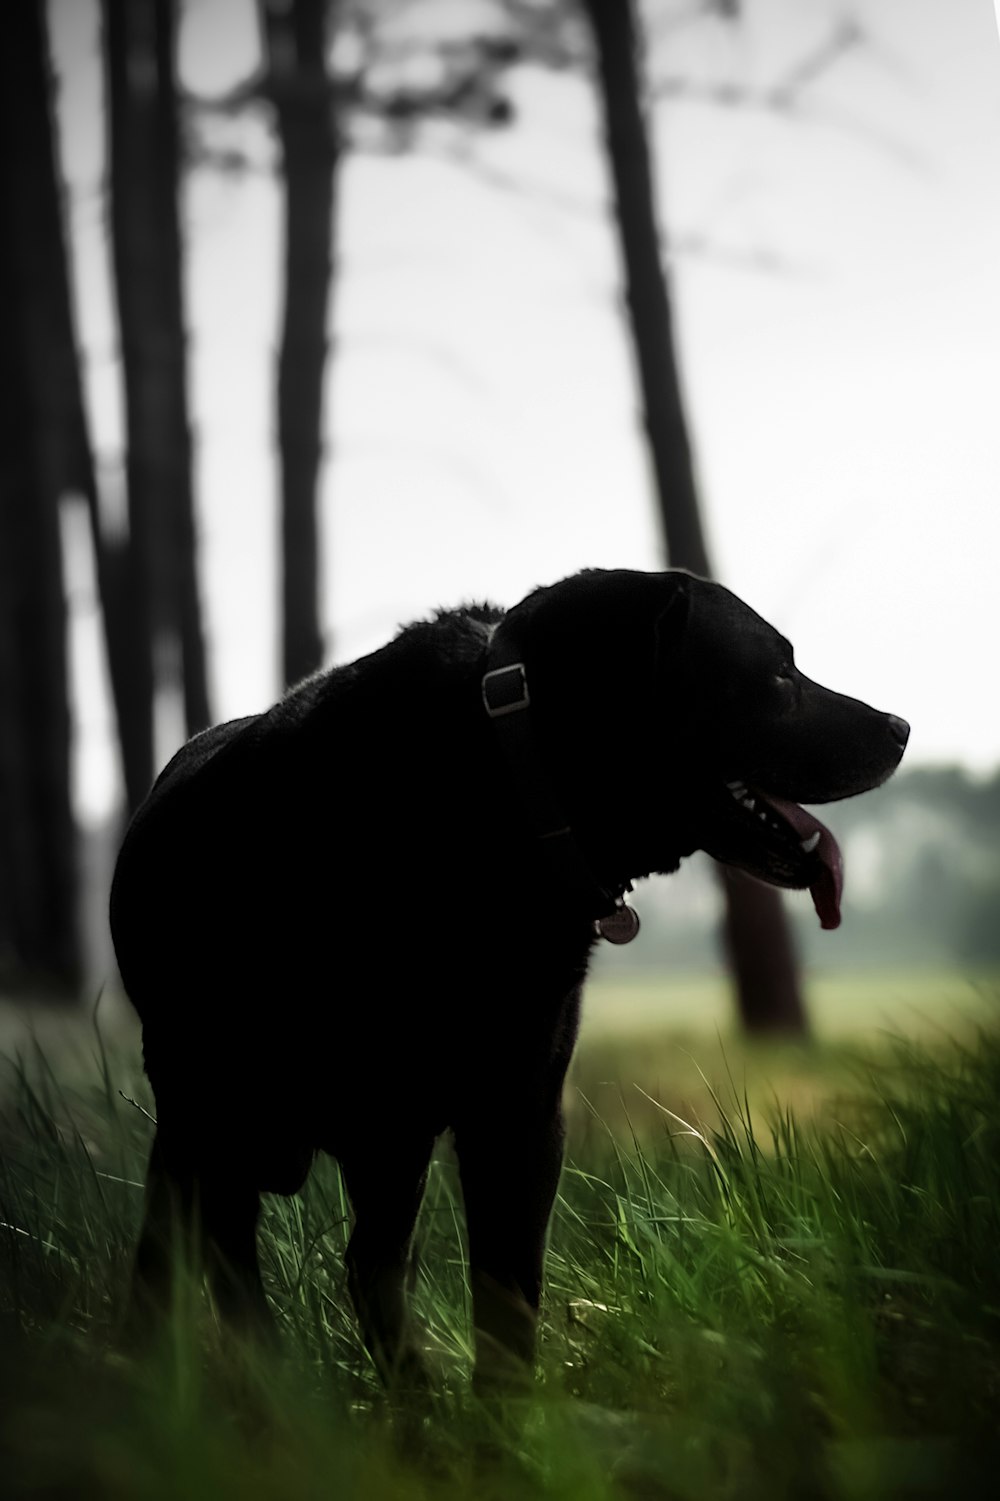 a black dog standing in a grassy field